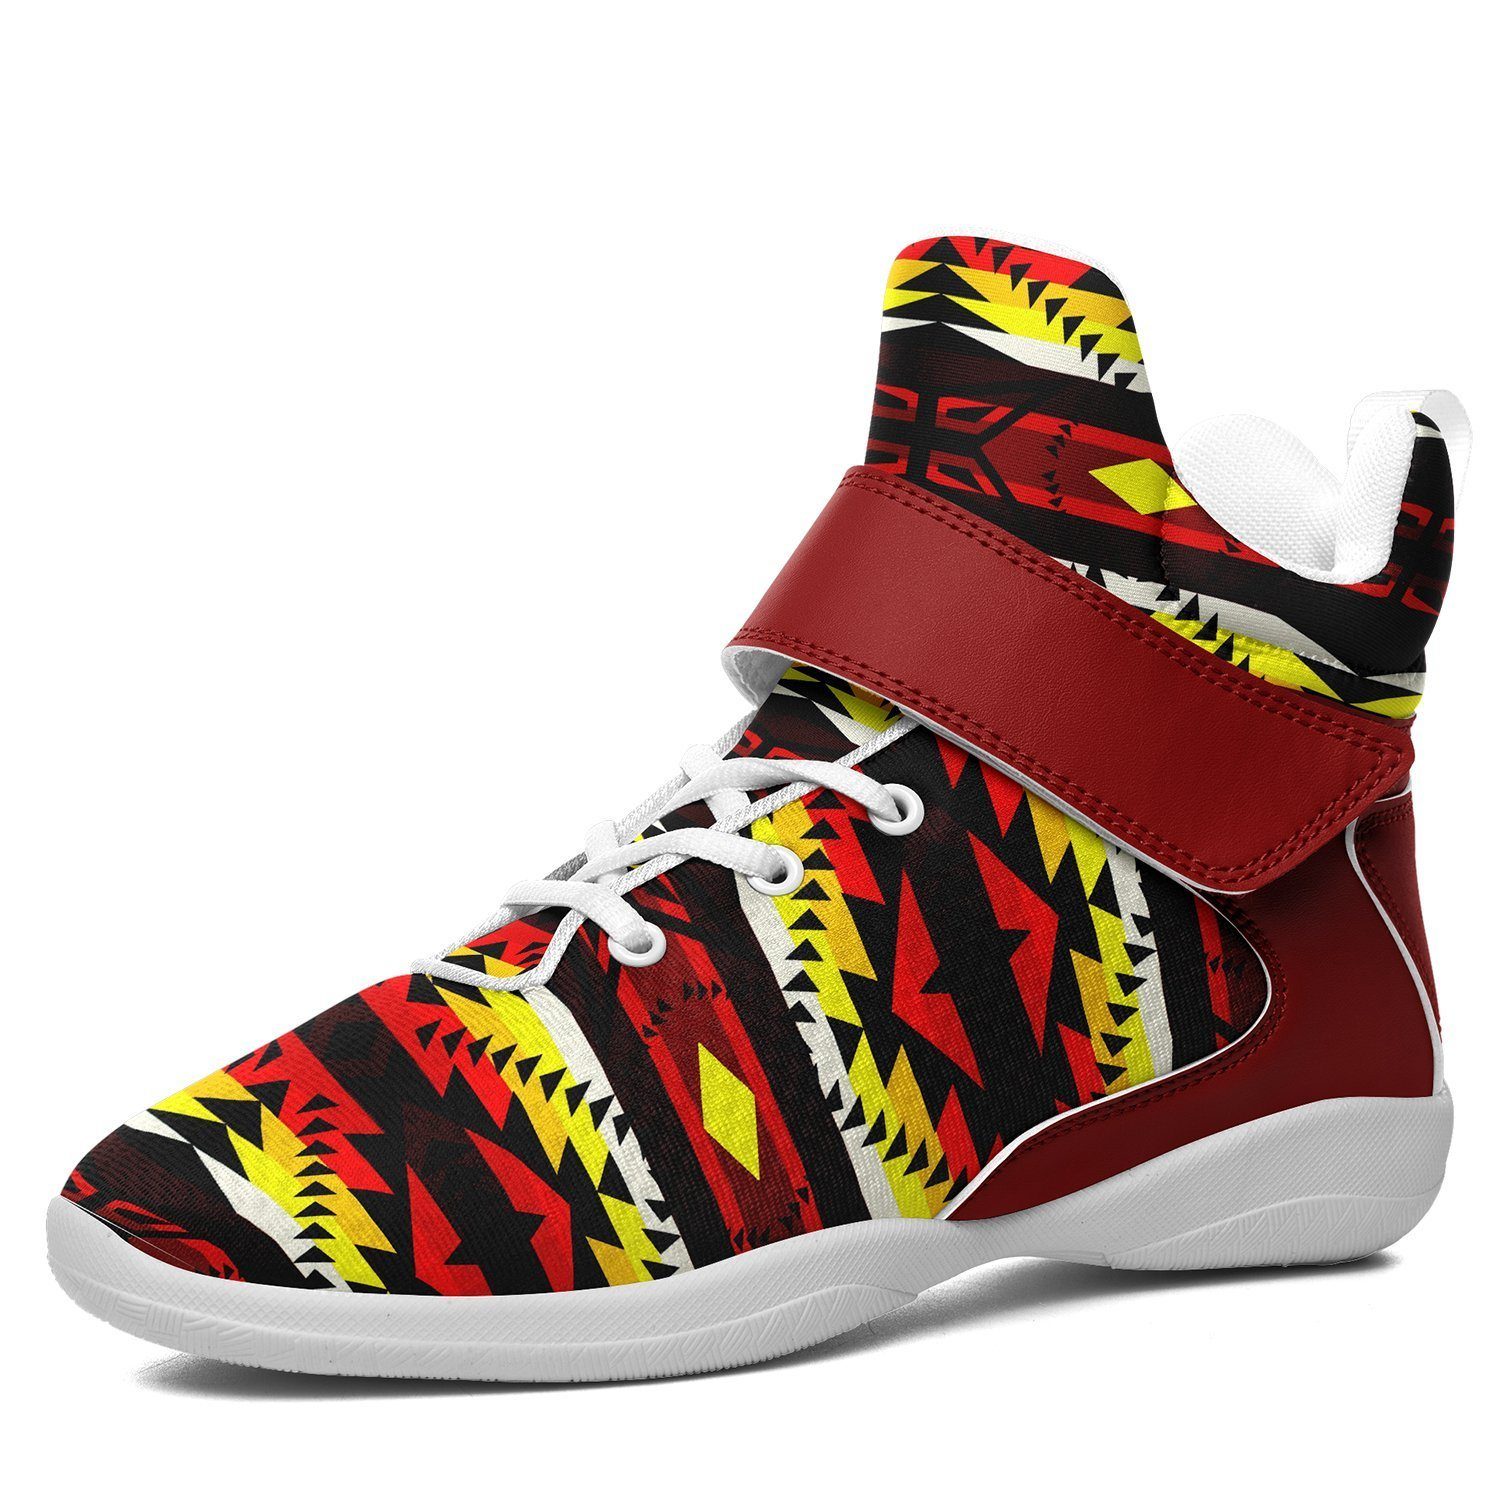 Canyon War Party Kid's Ipottaa Basketball / Sport High Top Shoes 49 Dzine US Child 12.5 / EUR 30 White Sole with Dark Red Strap 